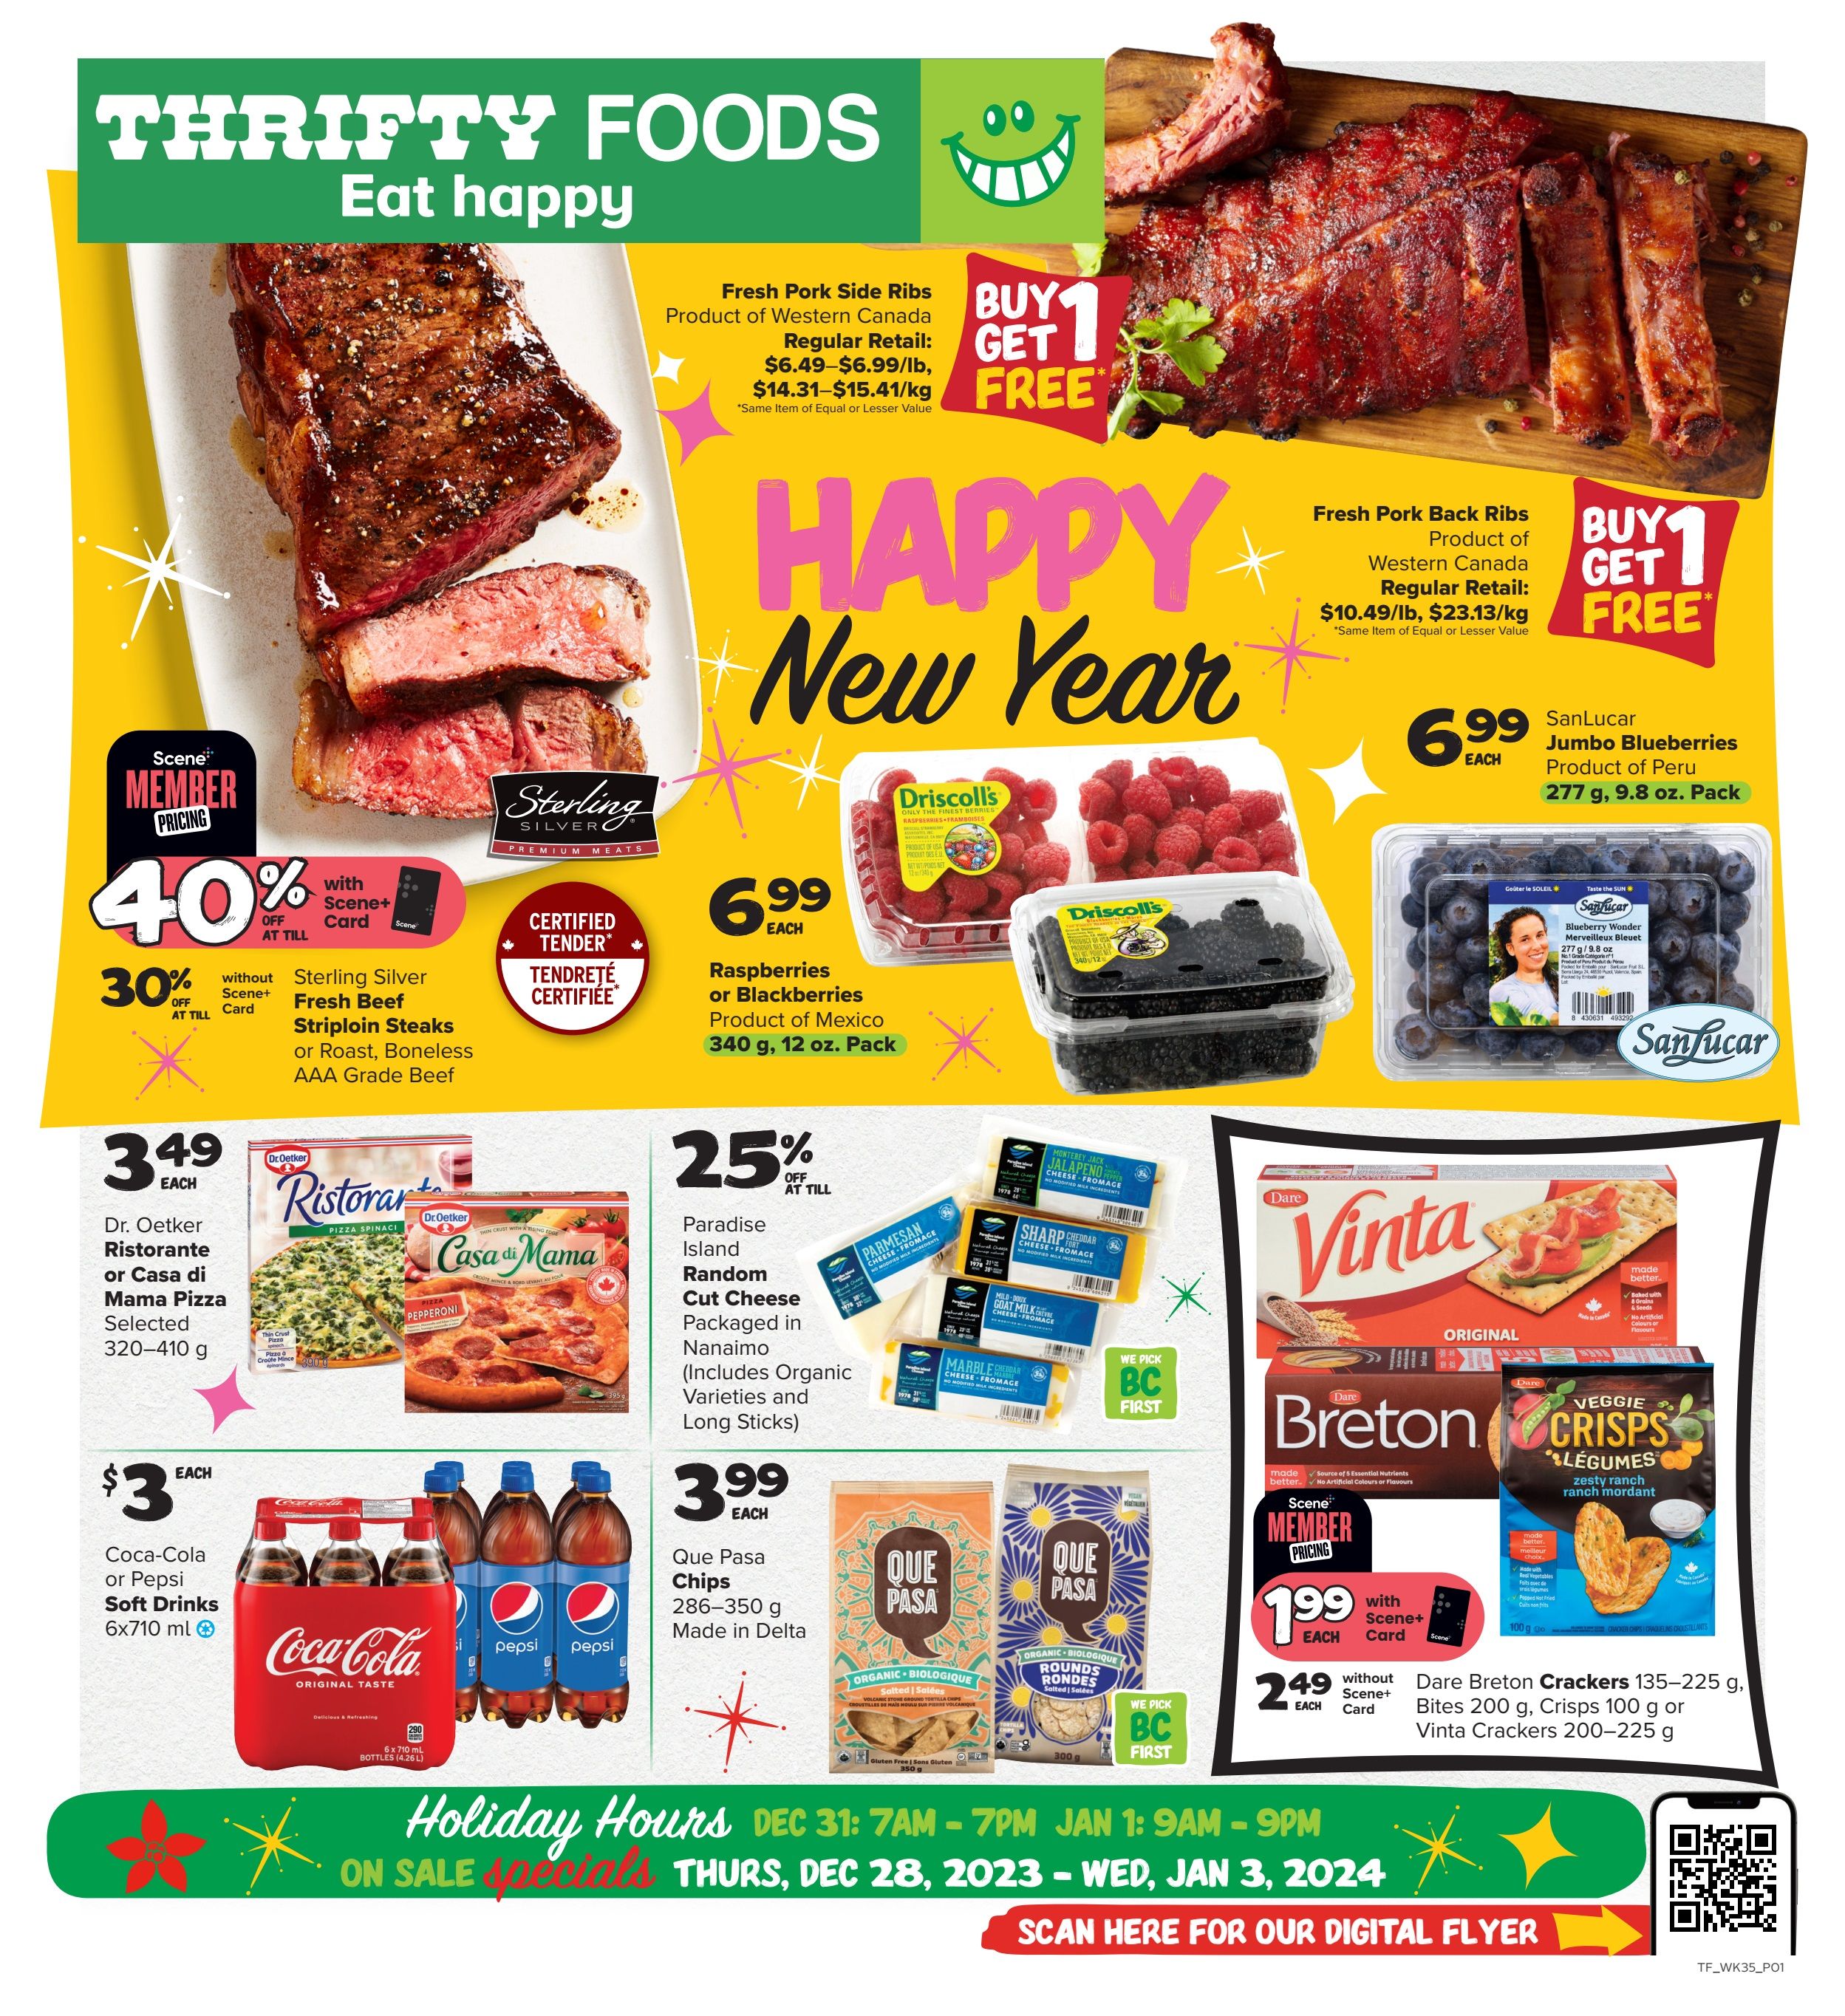 Thrifty food offers